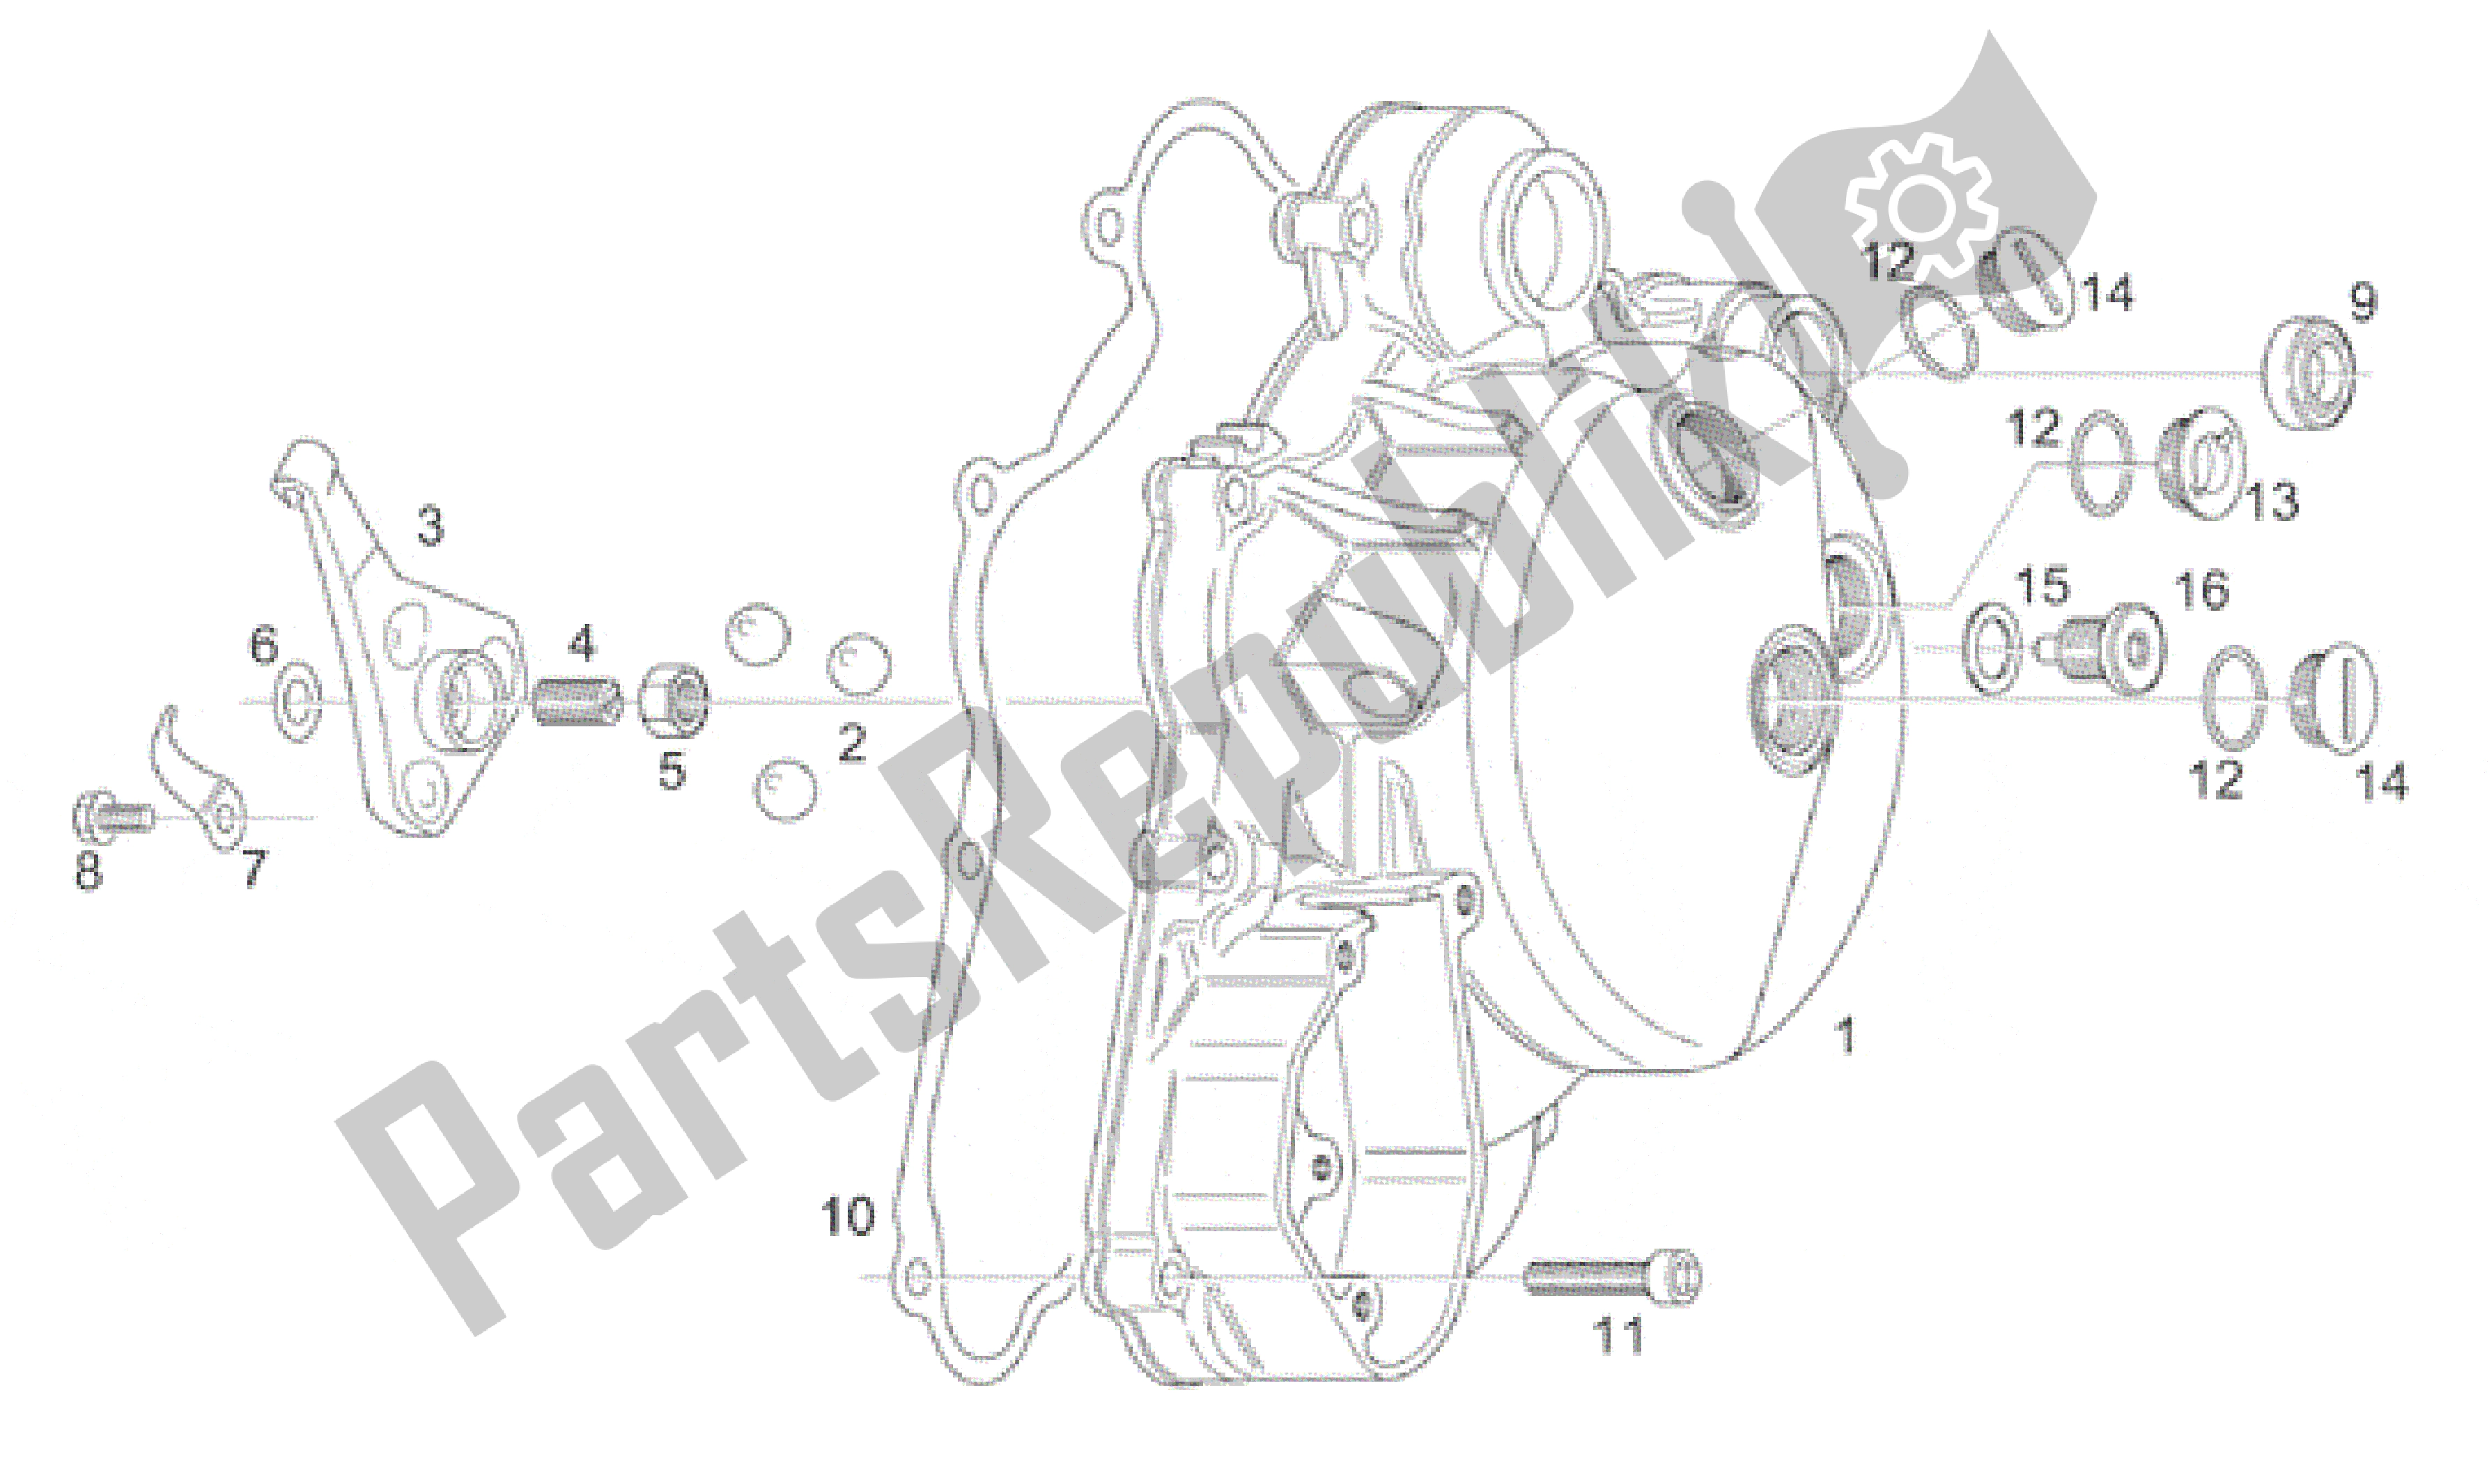 All parts for the Clutch Cover of the Aprilia Classic 125 1995 - 1999